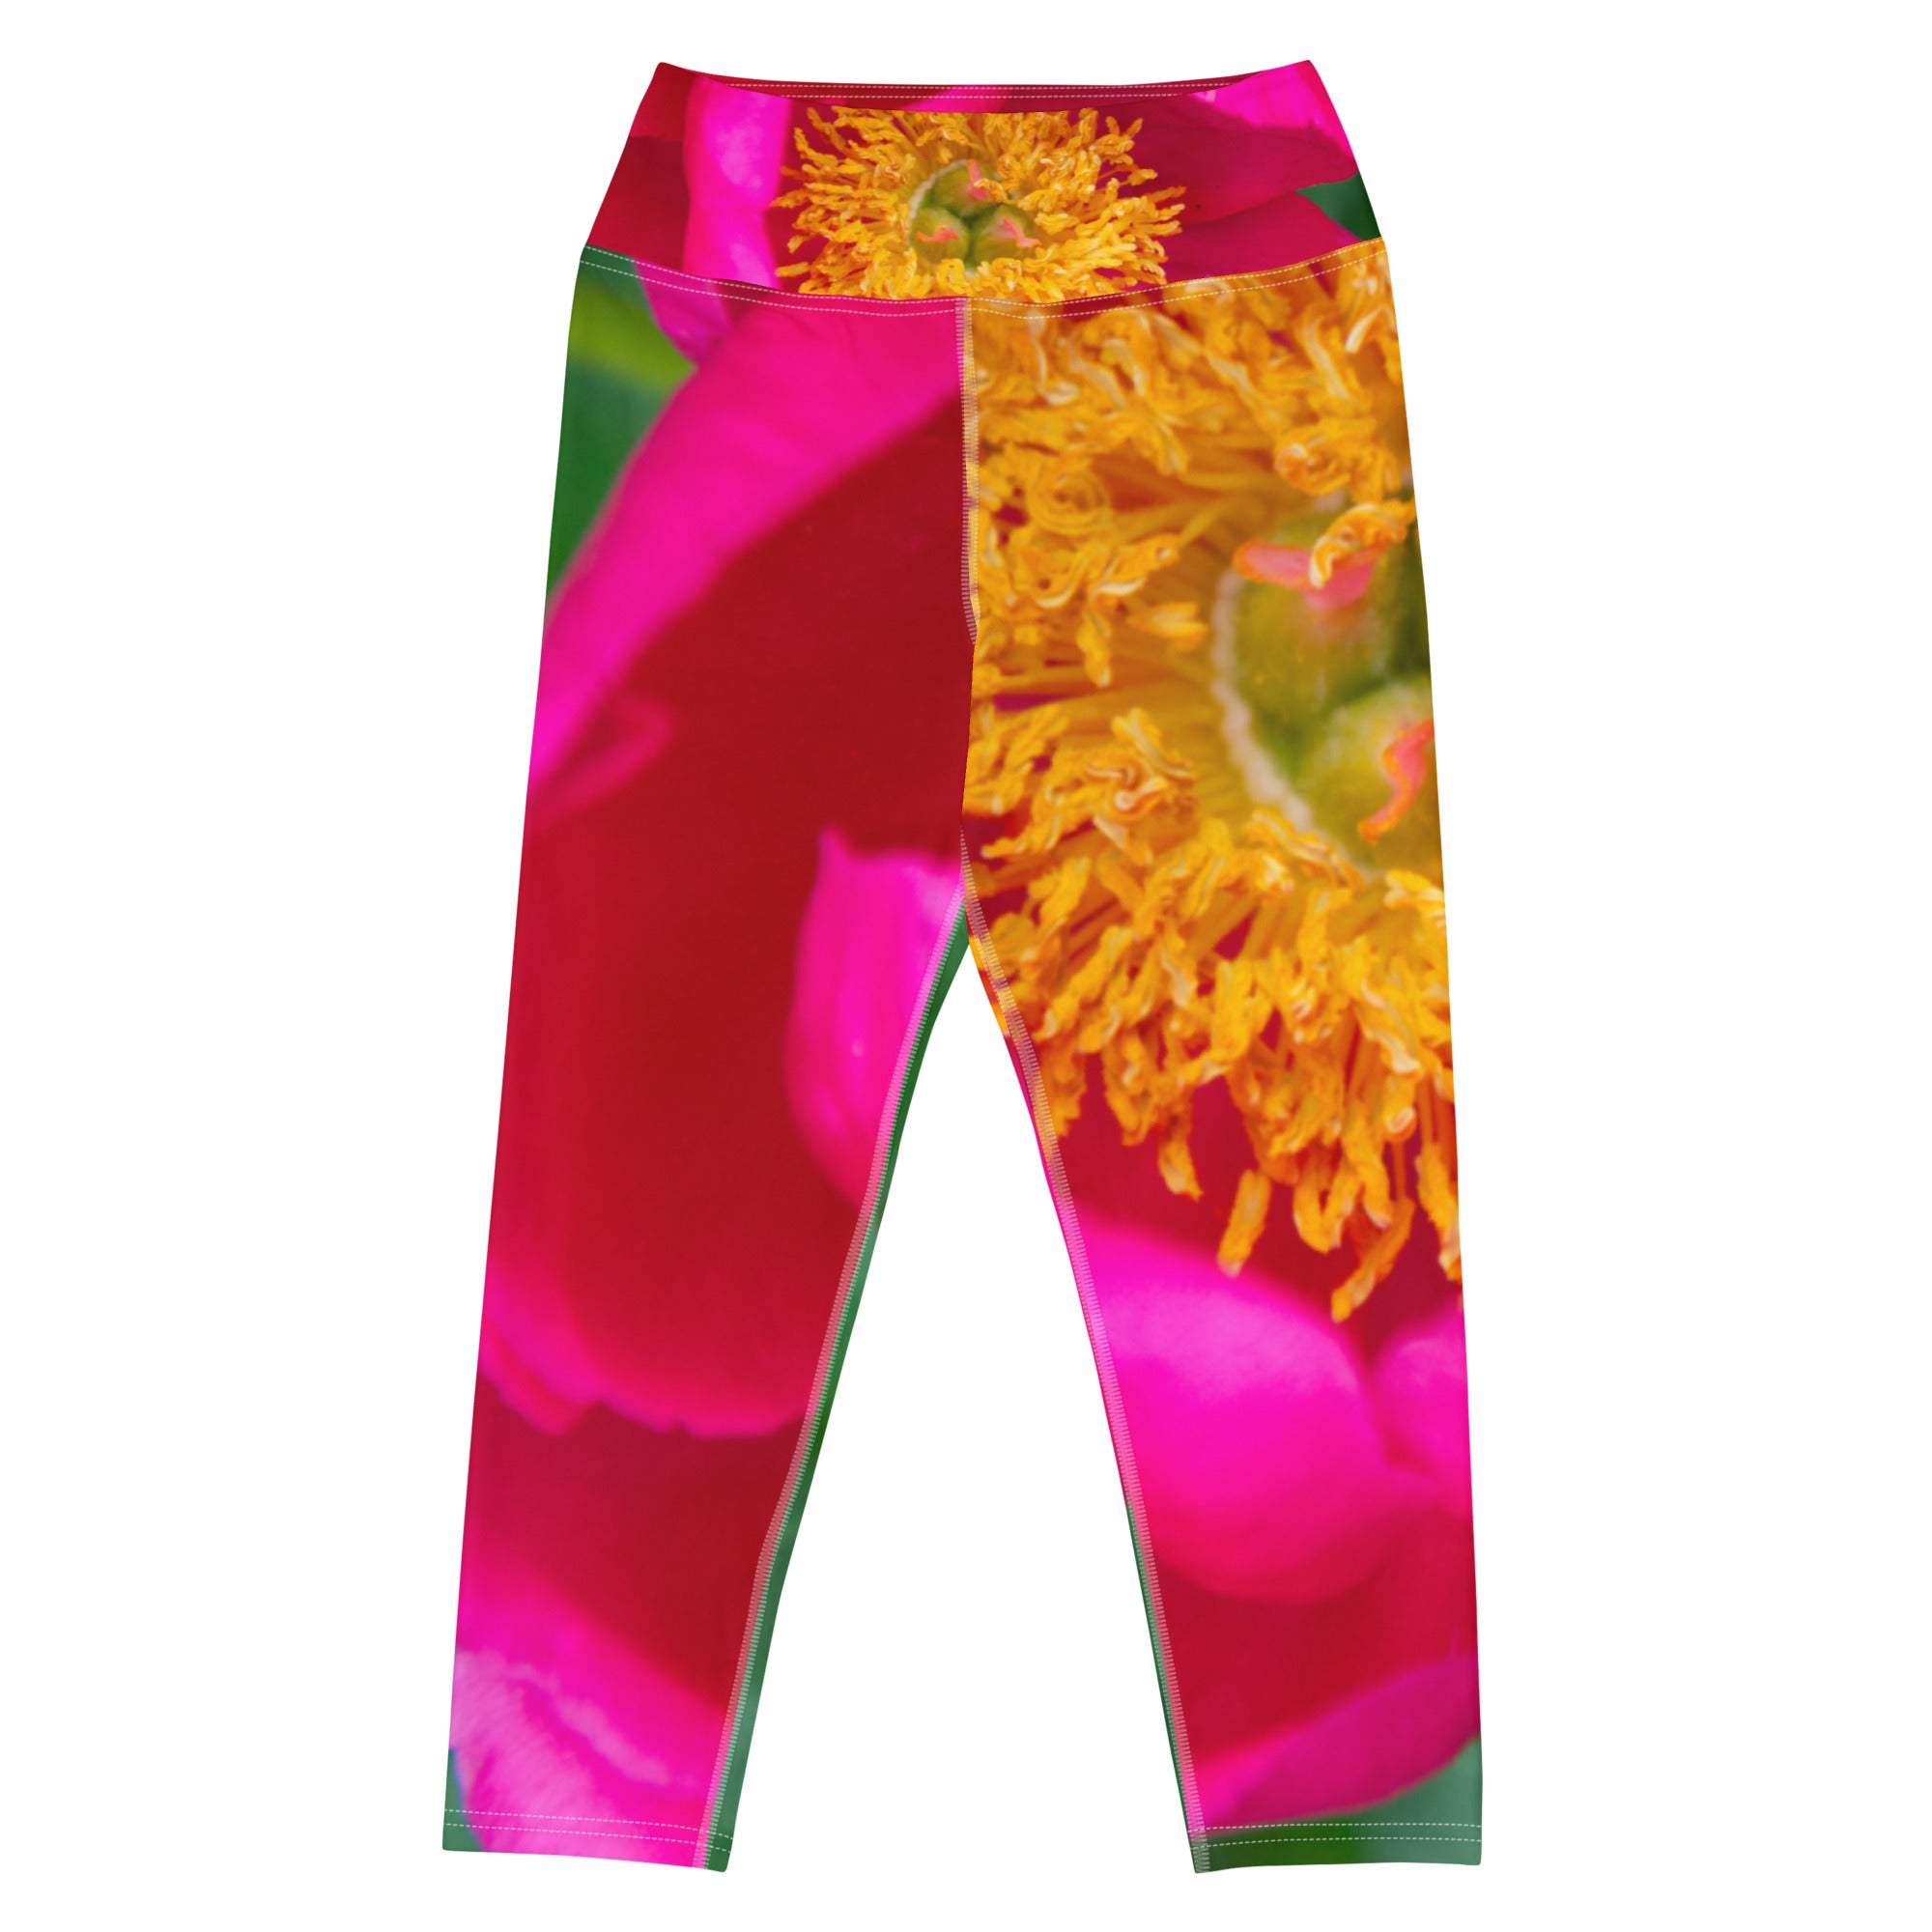 Bewitched Yoga Capris